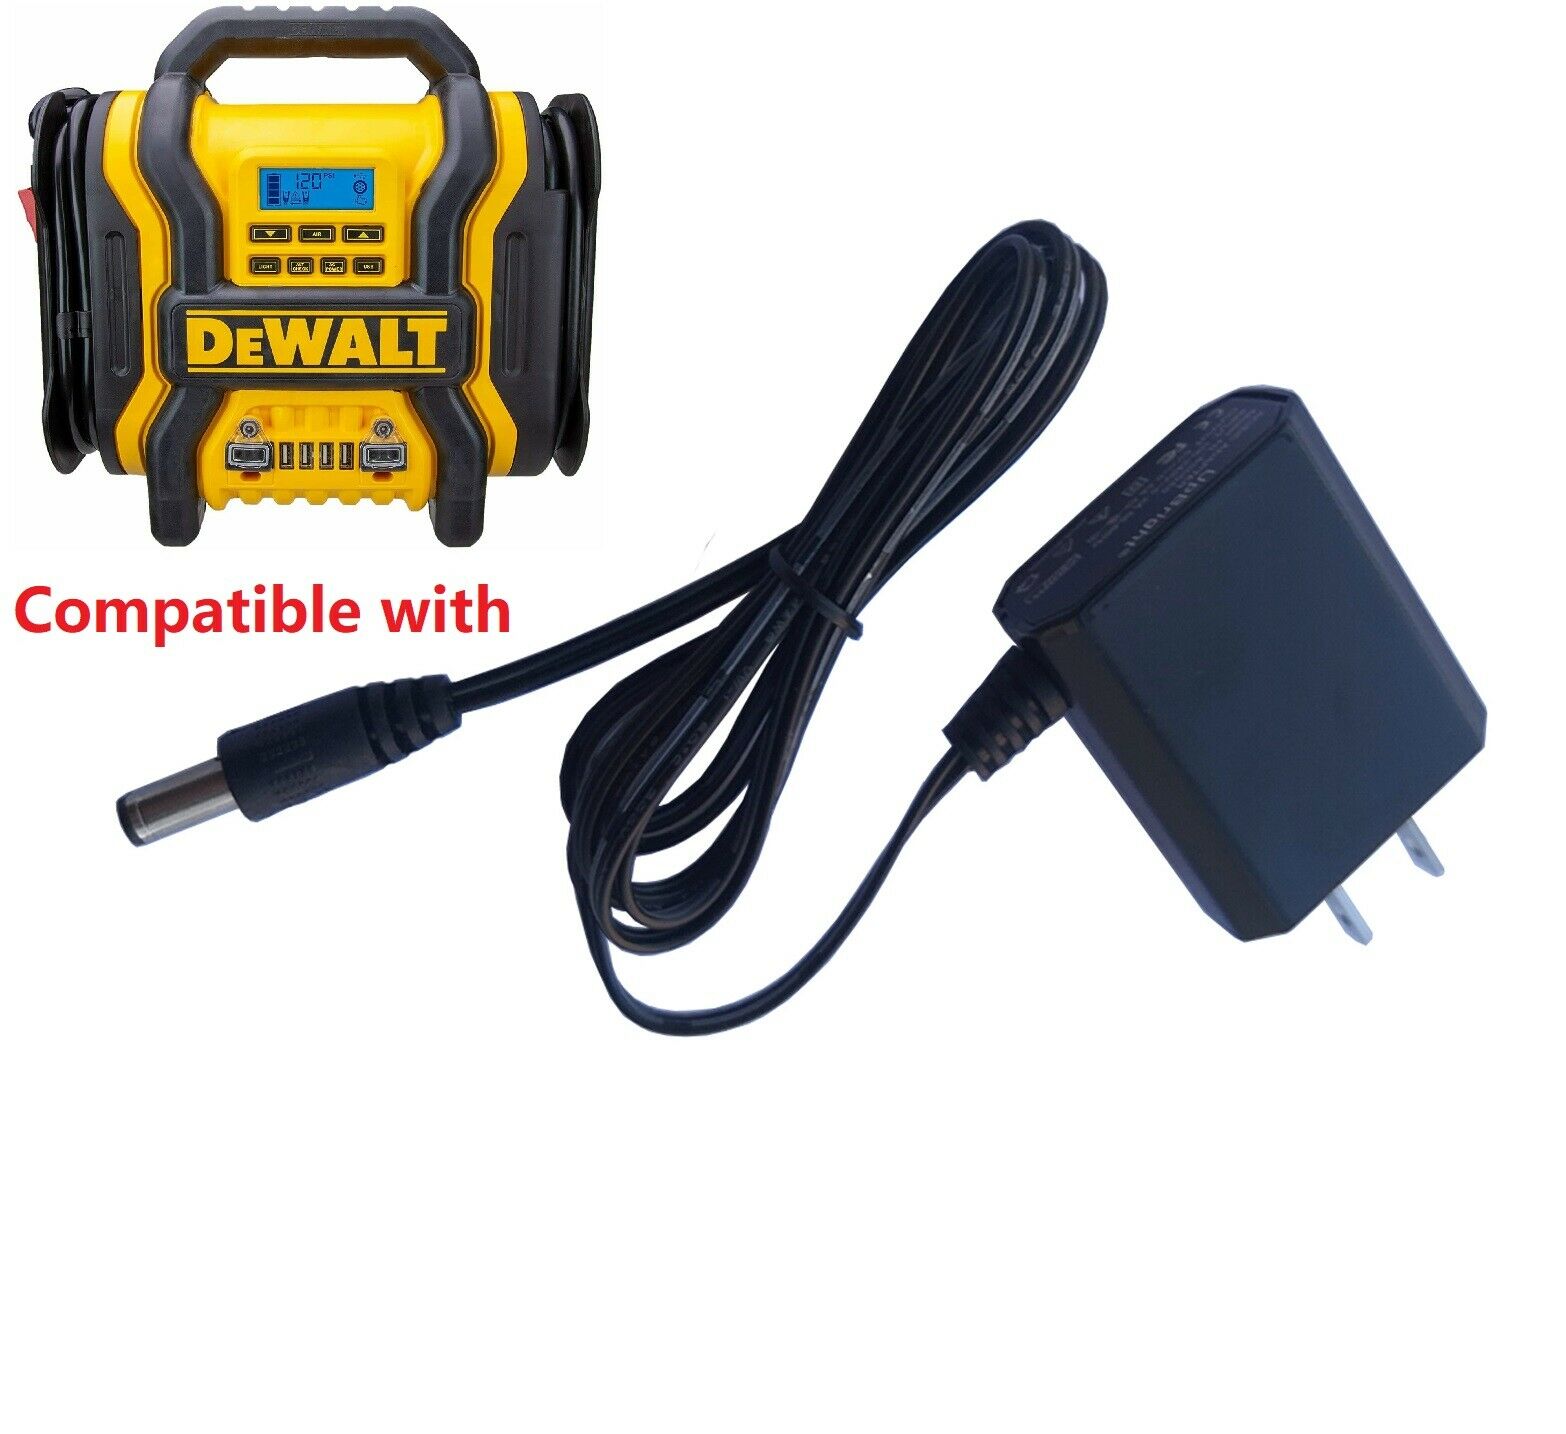 AC/DC Adapter Charger For Dewalt DXAEJ14 1400 Peak Amp Jump Starter Power Supply Specifications: Ty - Click Image to Close